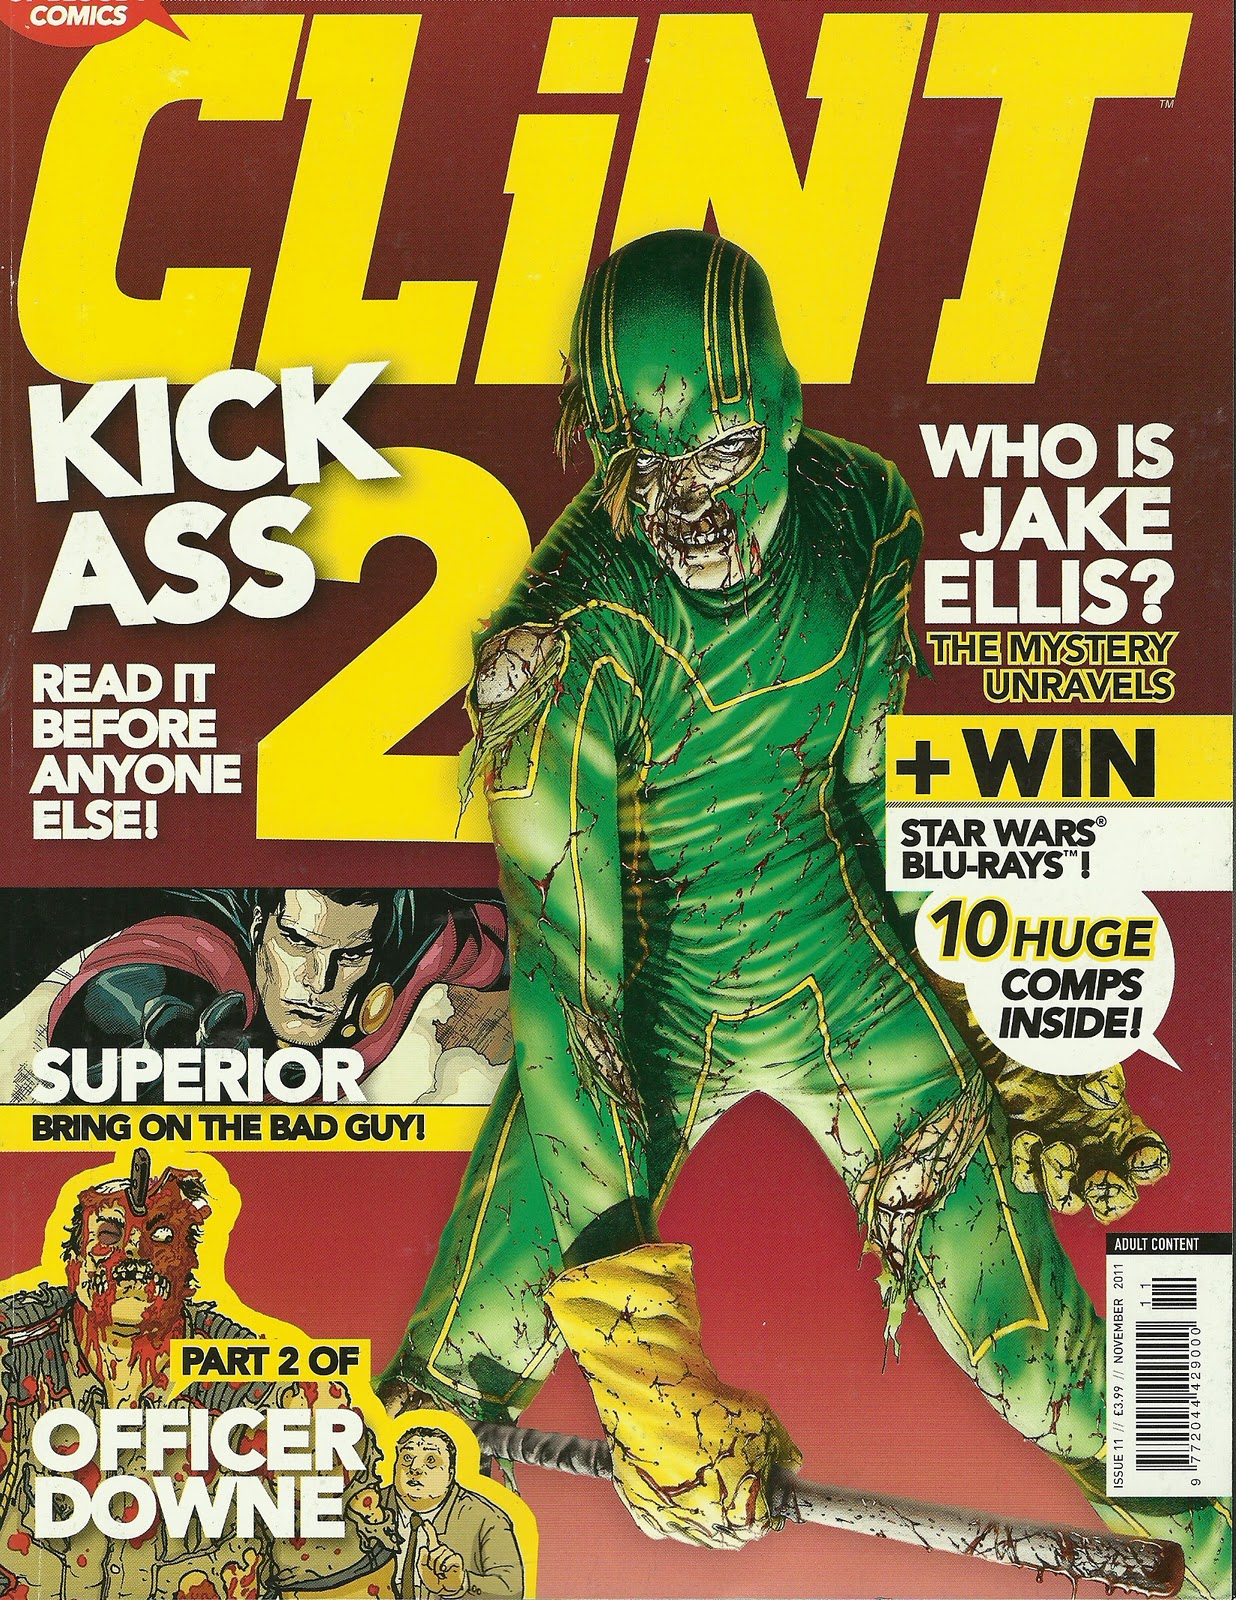 Too Busy Thinking About My Comics: On Mark Millar & John Romita Jr's Kick  Ass 2, part 11, from Clint # 11: Oh my god. We've gone too far this  time. Even For Us...